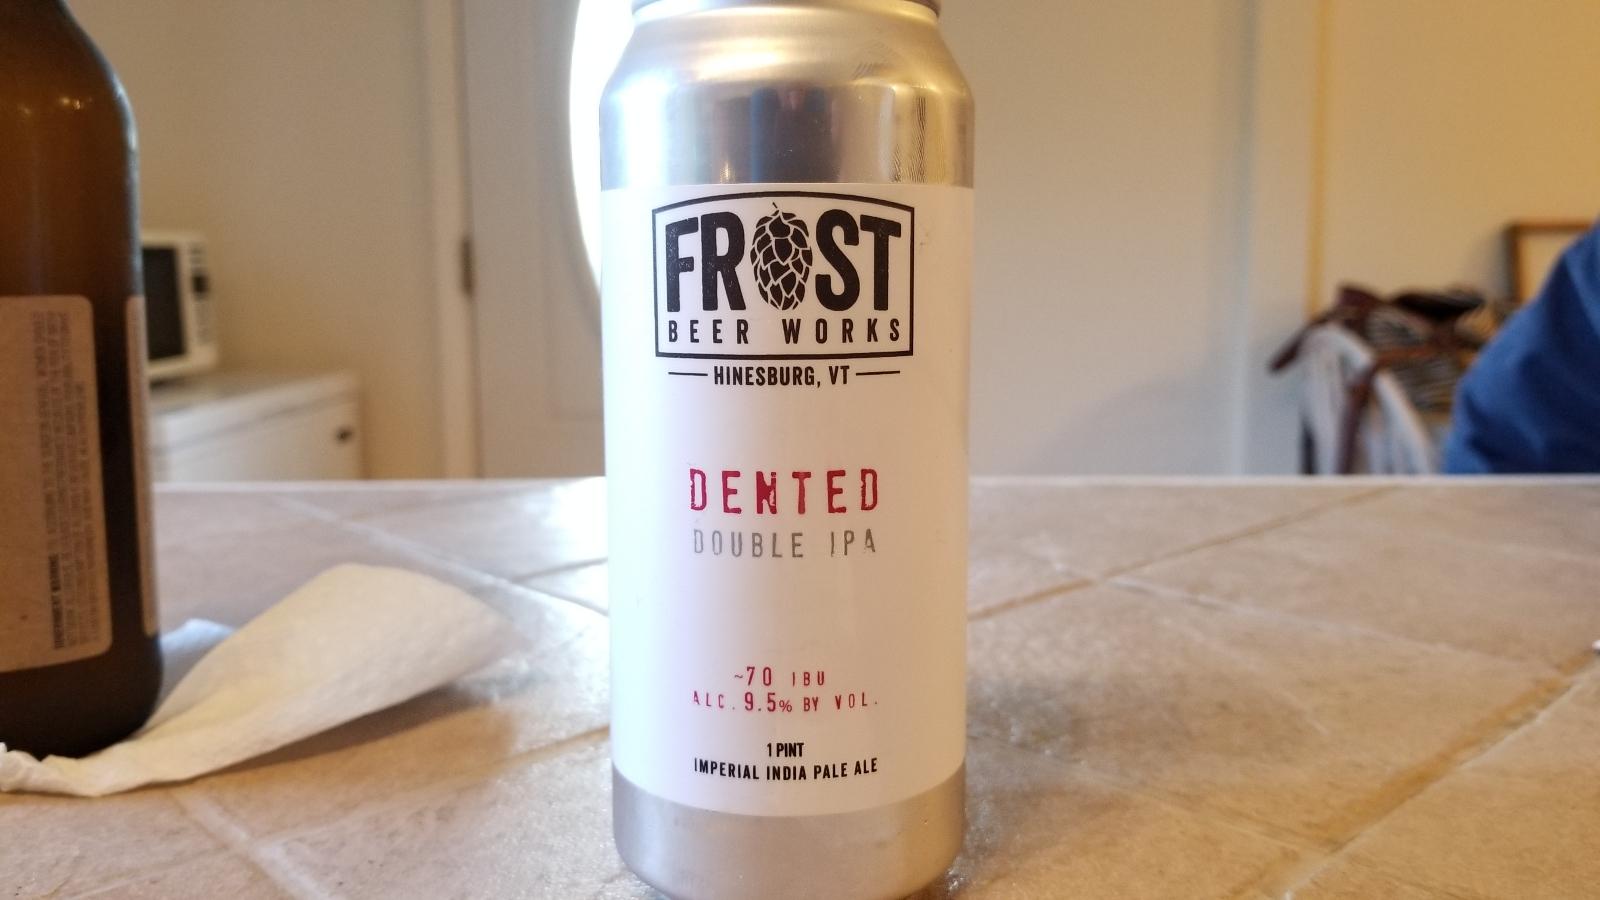 Dented Double IPA - Research Series